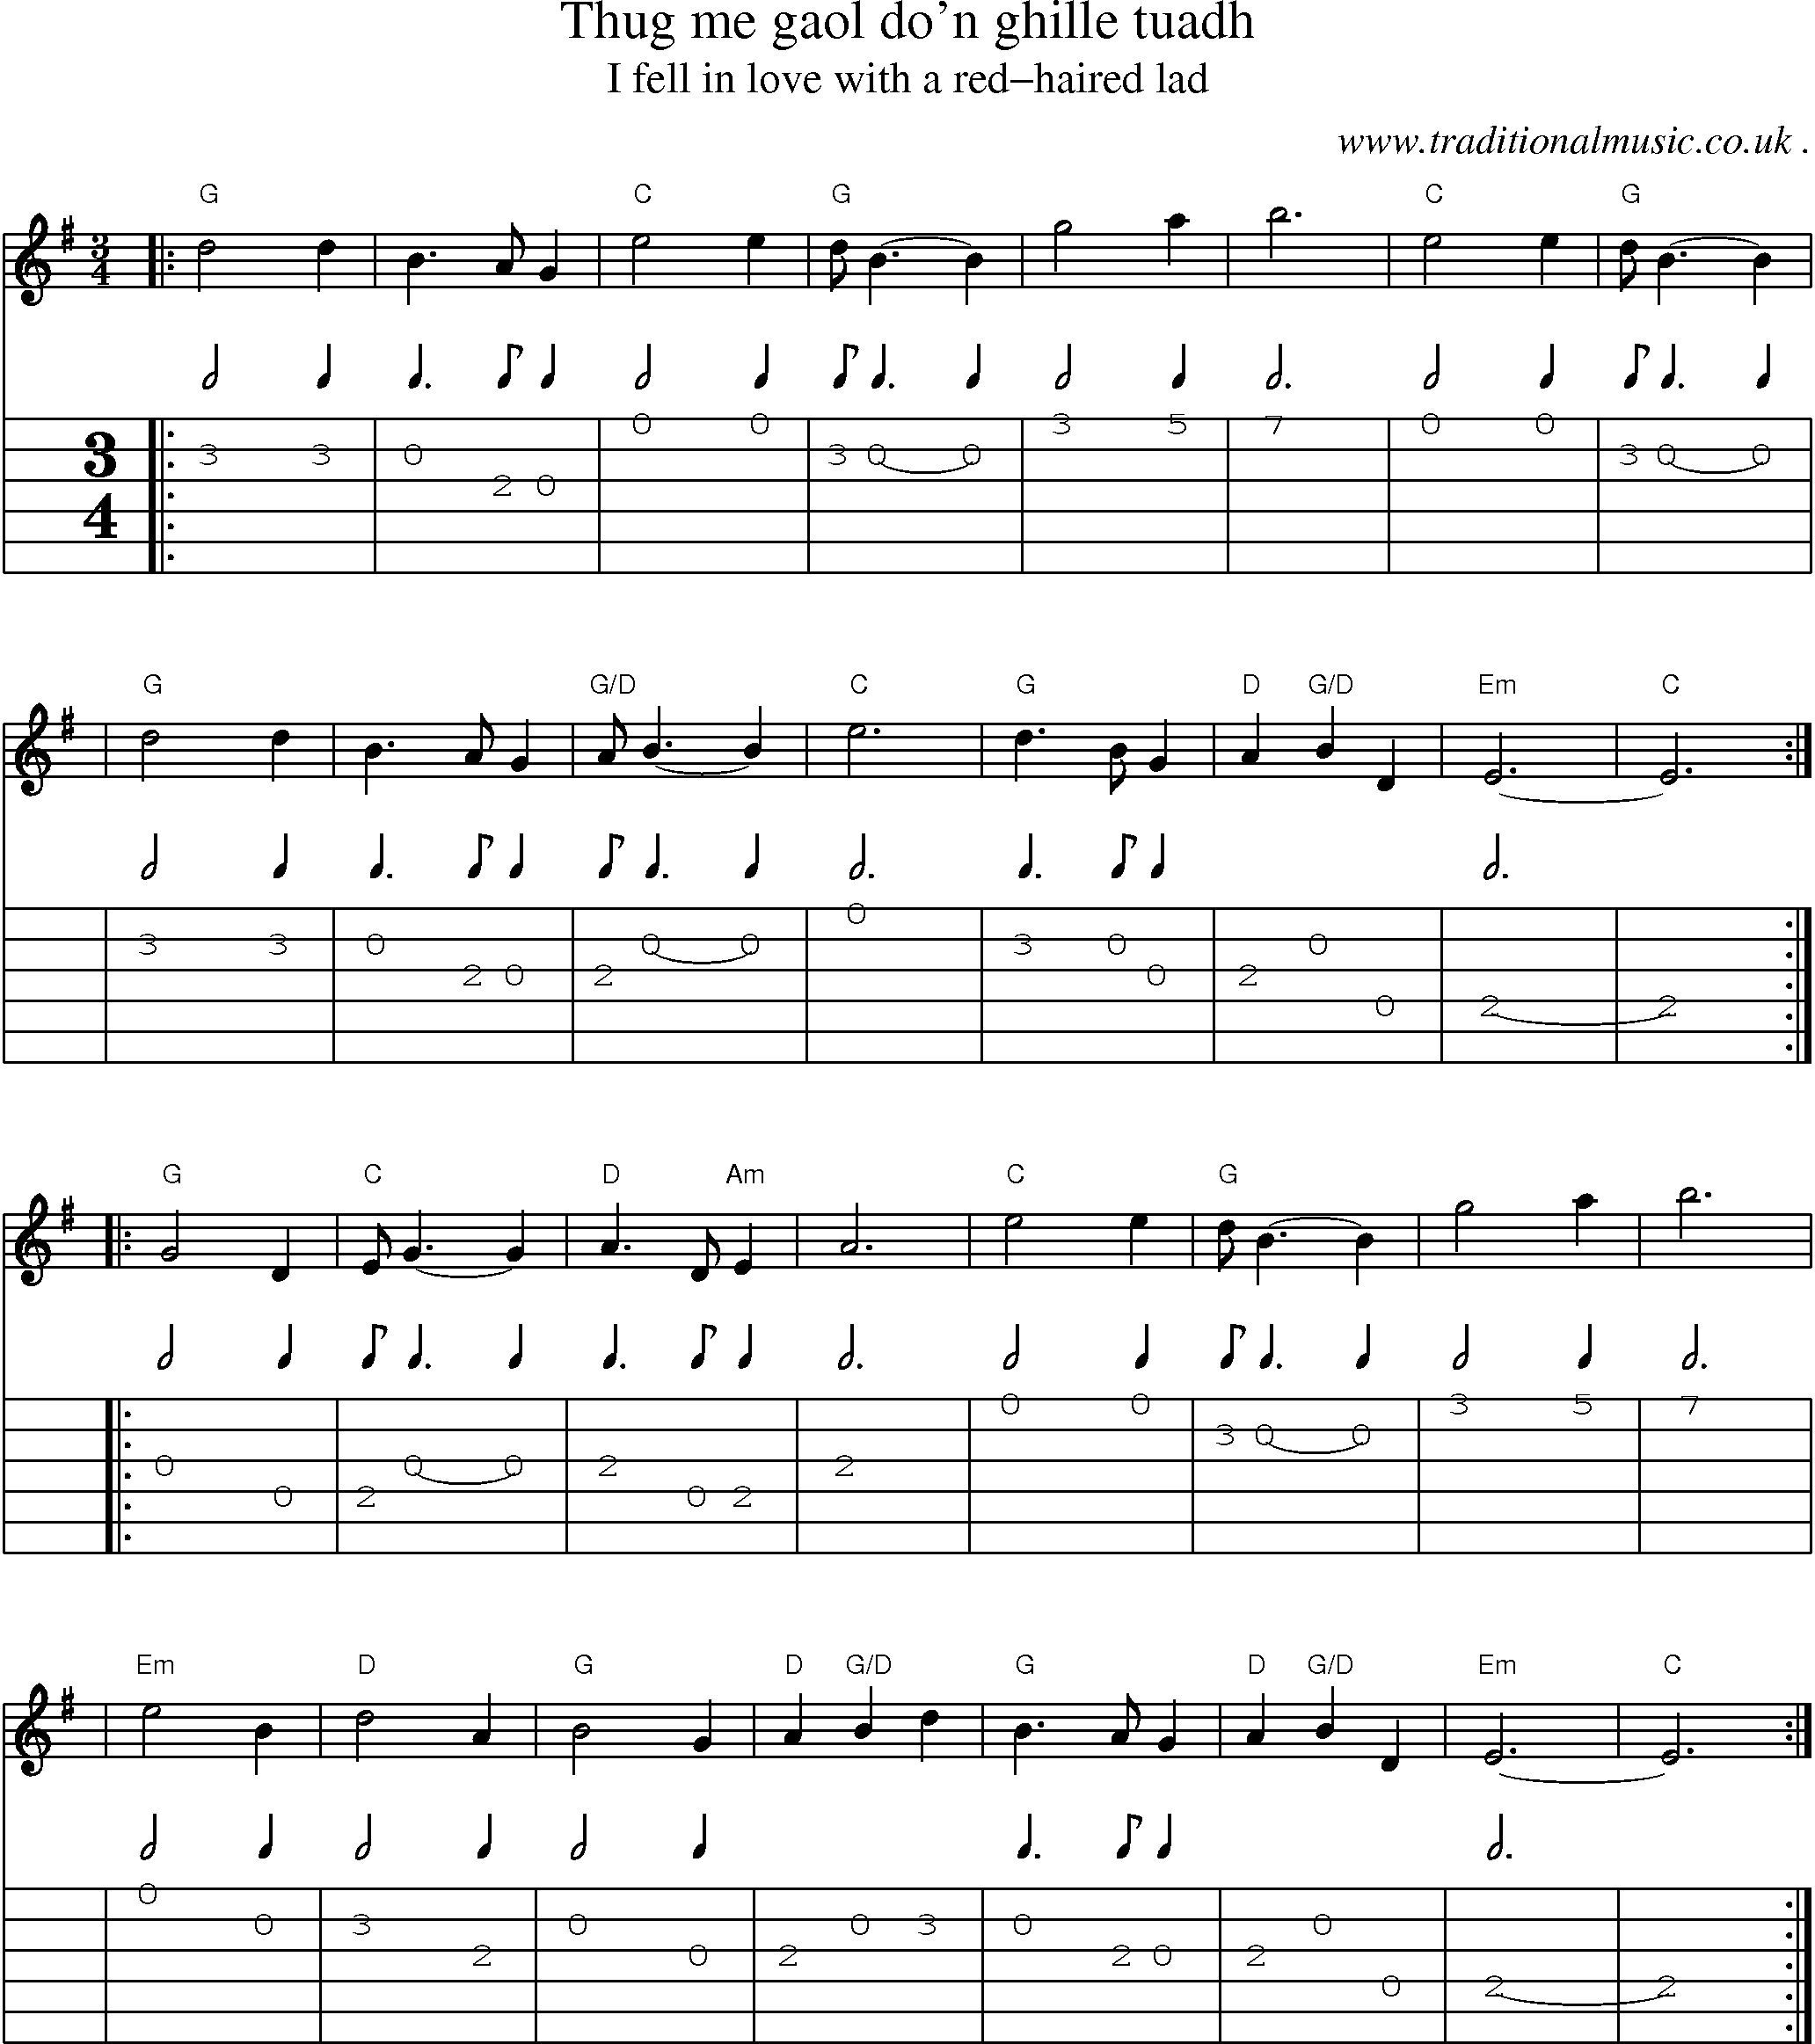 Sheet-music  score, Chords and Guitar Tabs for Thug Me Gaol Don Ghille Tuadh